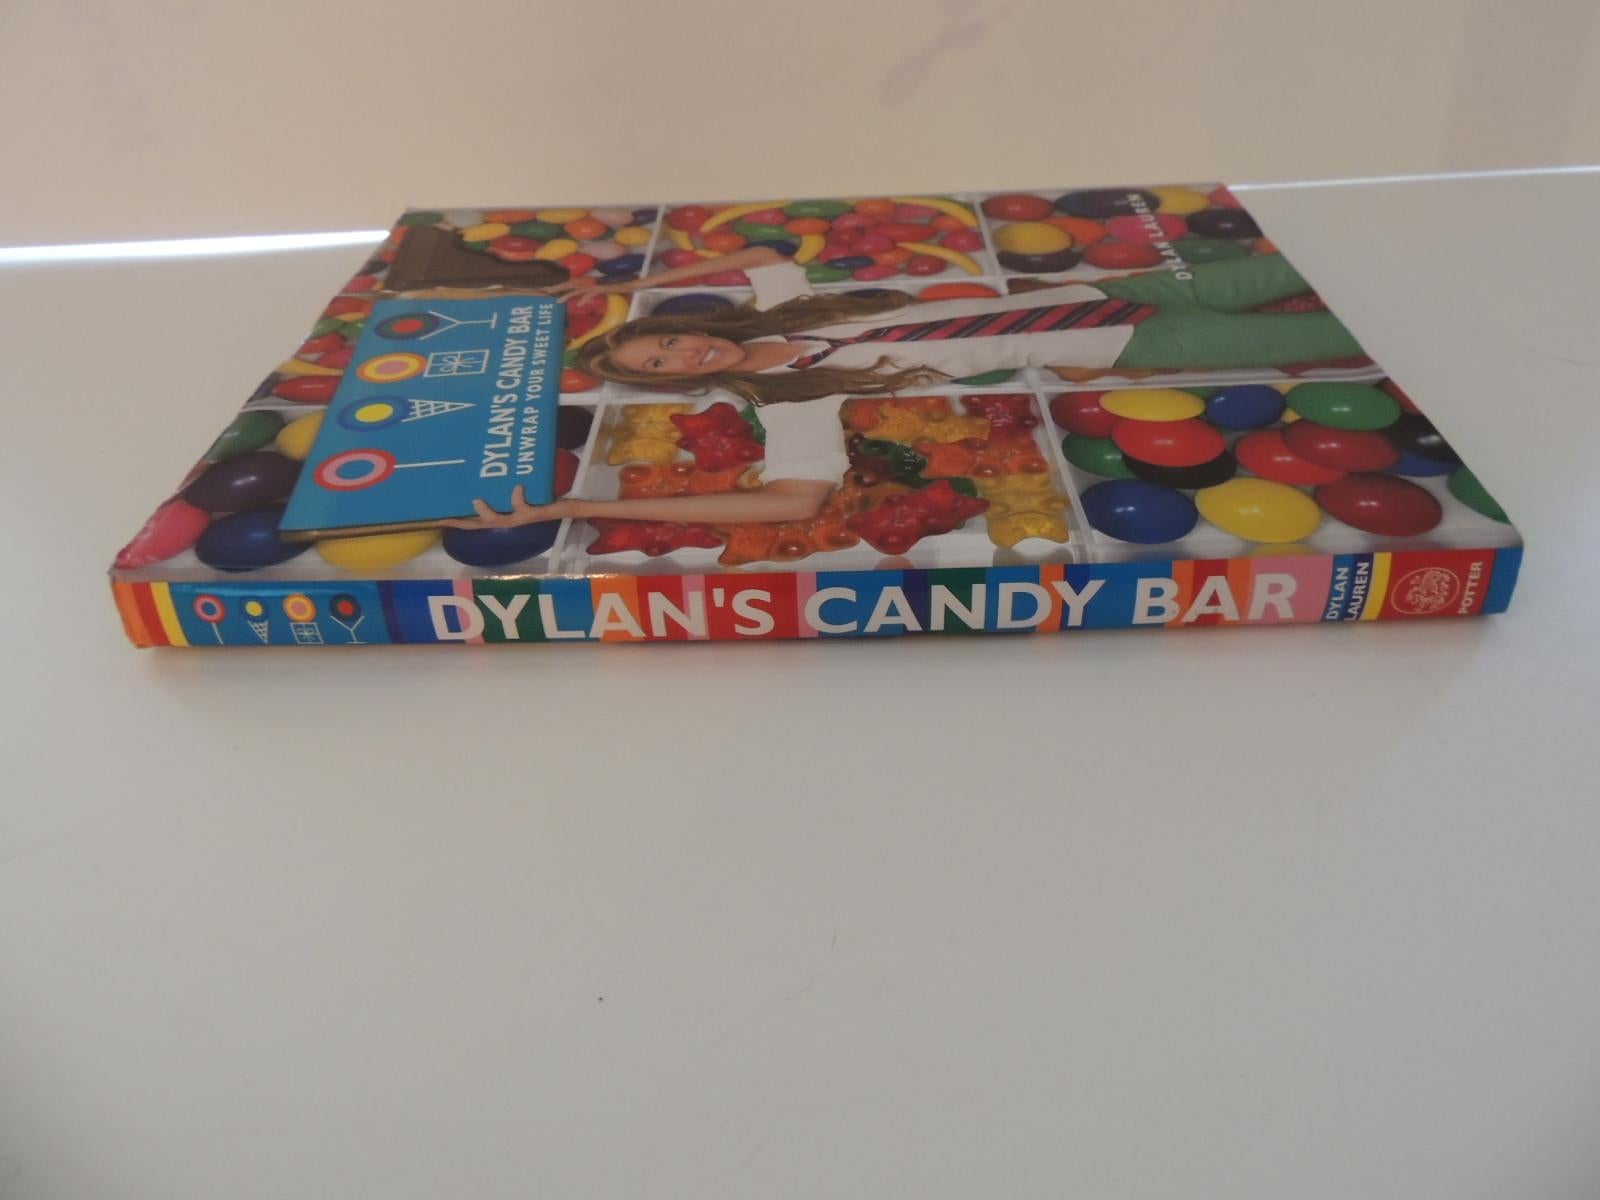 Dylan's Candy Bar Unwrap Your Sweet Life hardcover coffee table book
Publisher: Clarkson Potter; 1st edition (October 5, 2010)
Language: English
Hardcover: 224 pages
Dimensions: 9.31 x 0.8 x 12.3 inches.
 